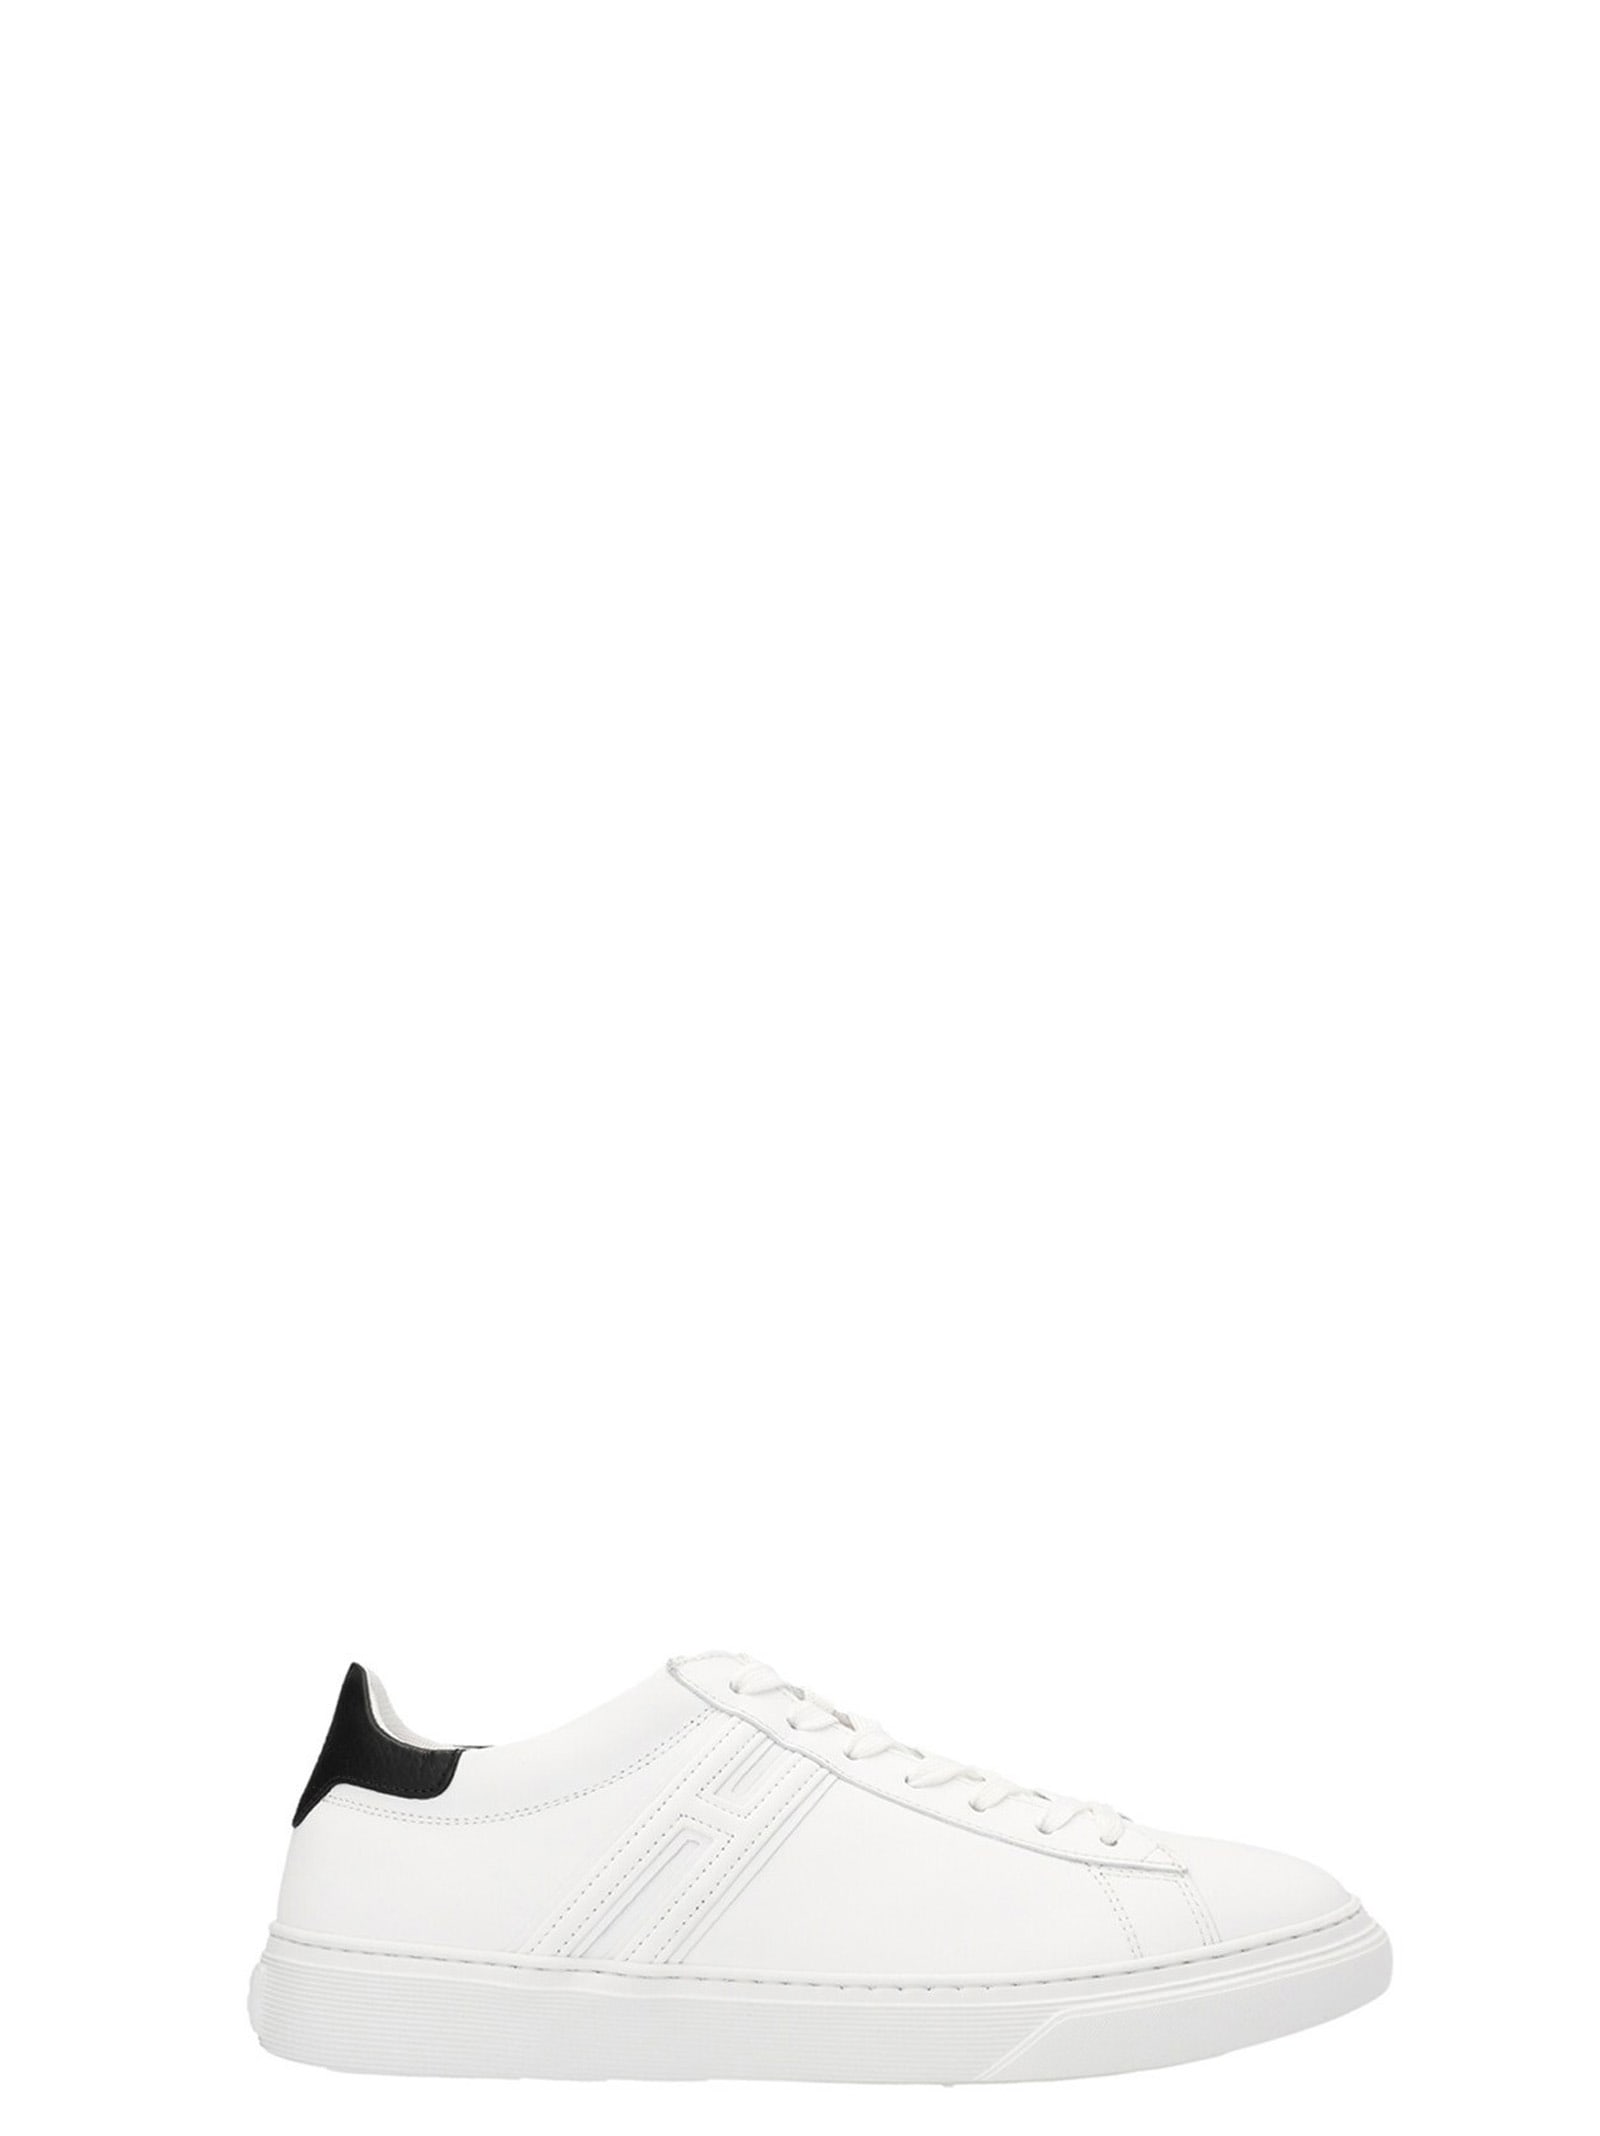 Hogan canaletto Sneakers